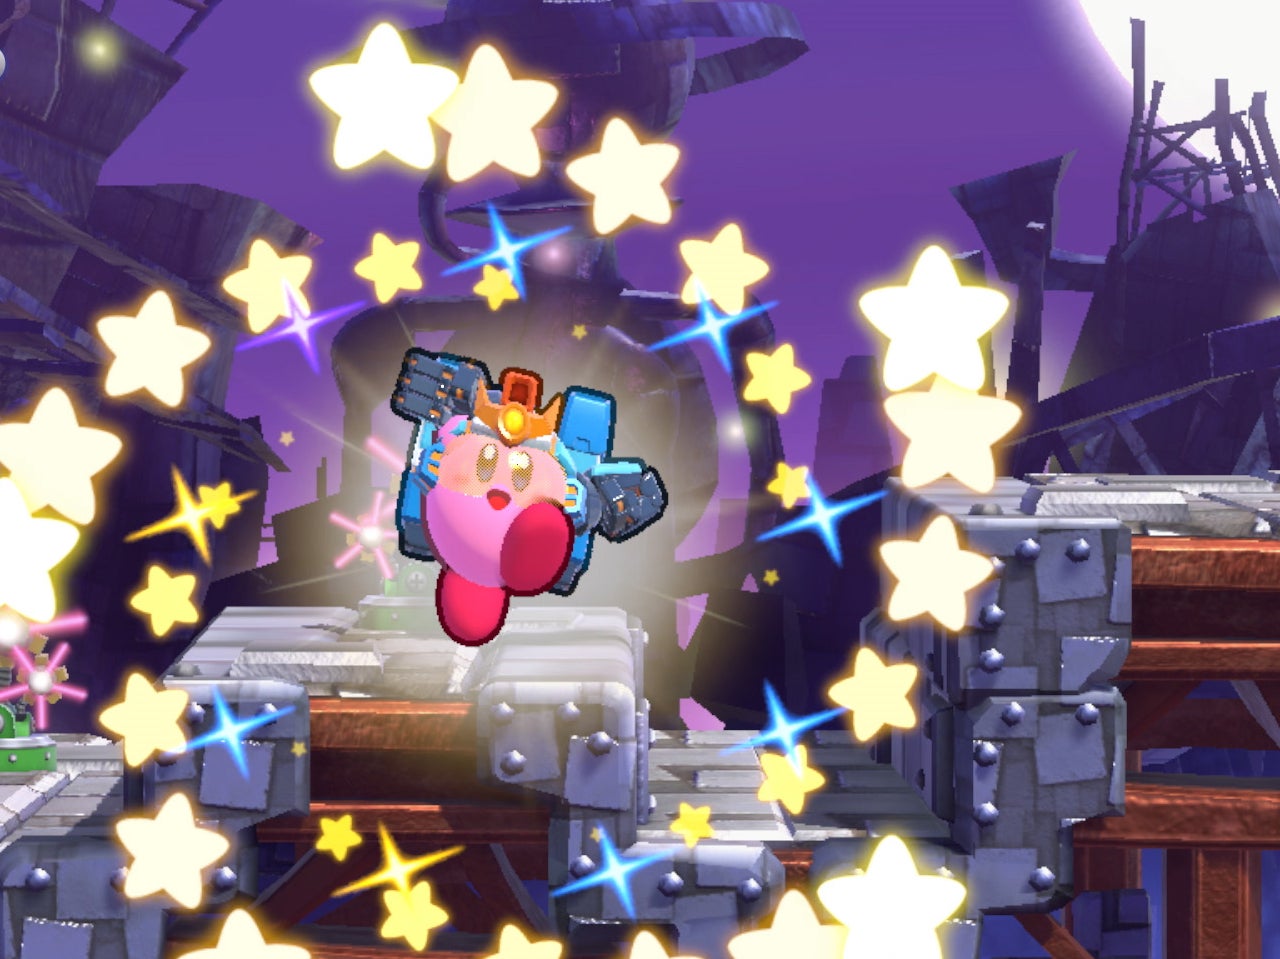 A picture of a triumphant Kirby in his next upcoming adventure